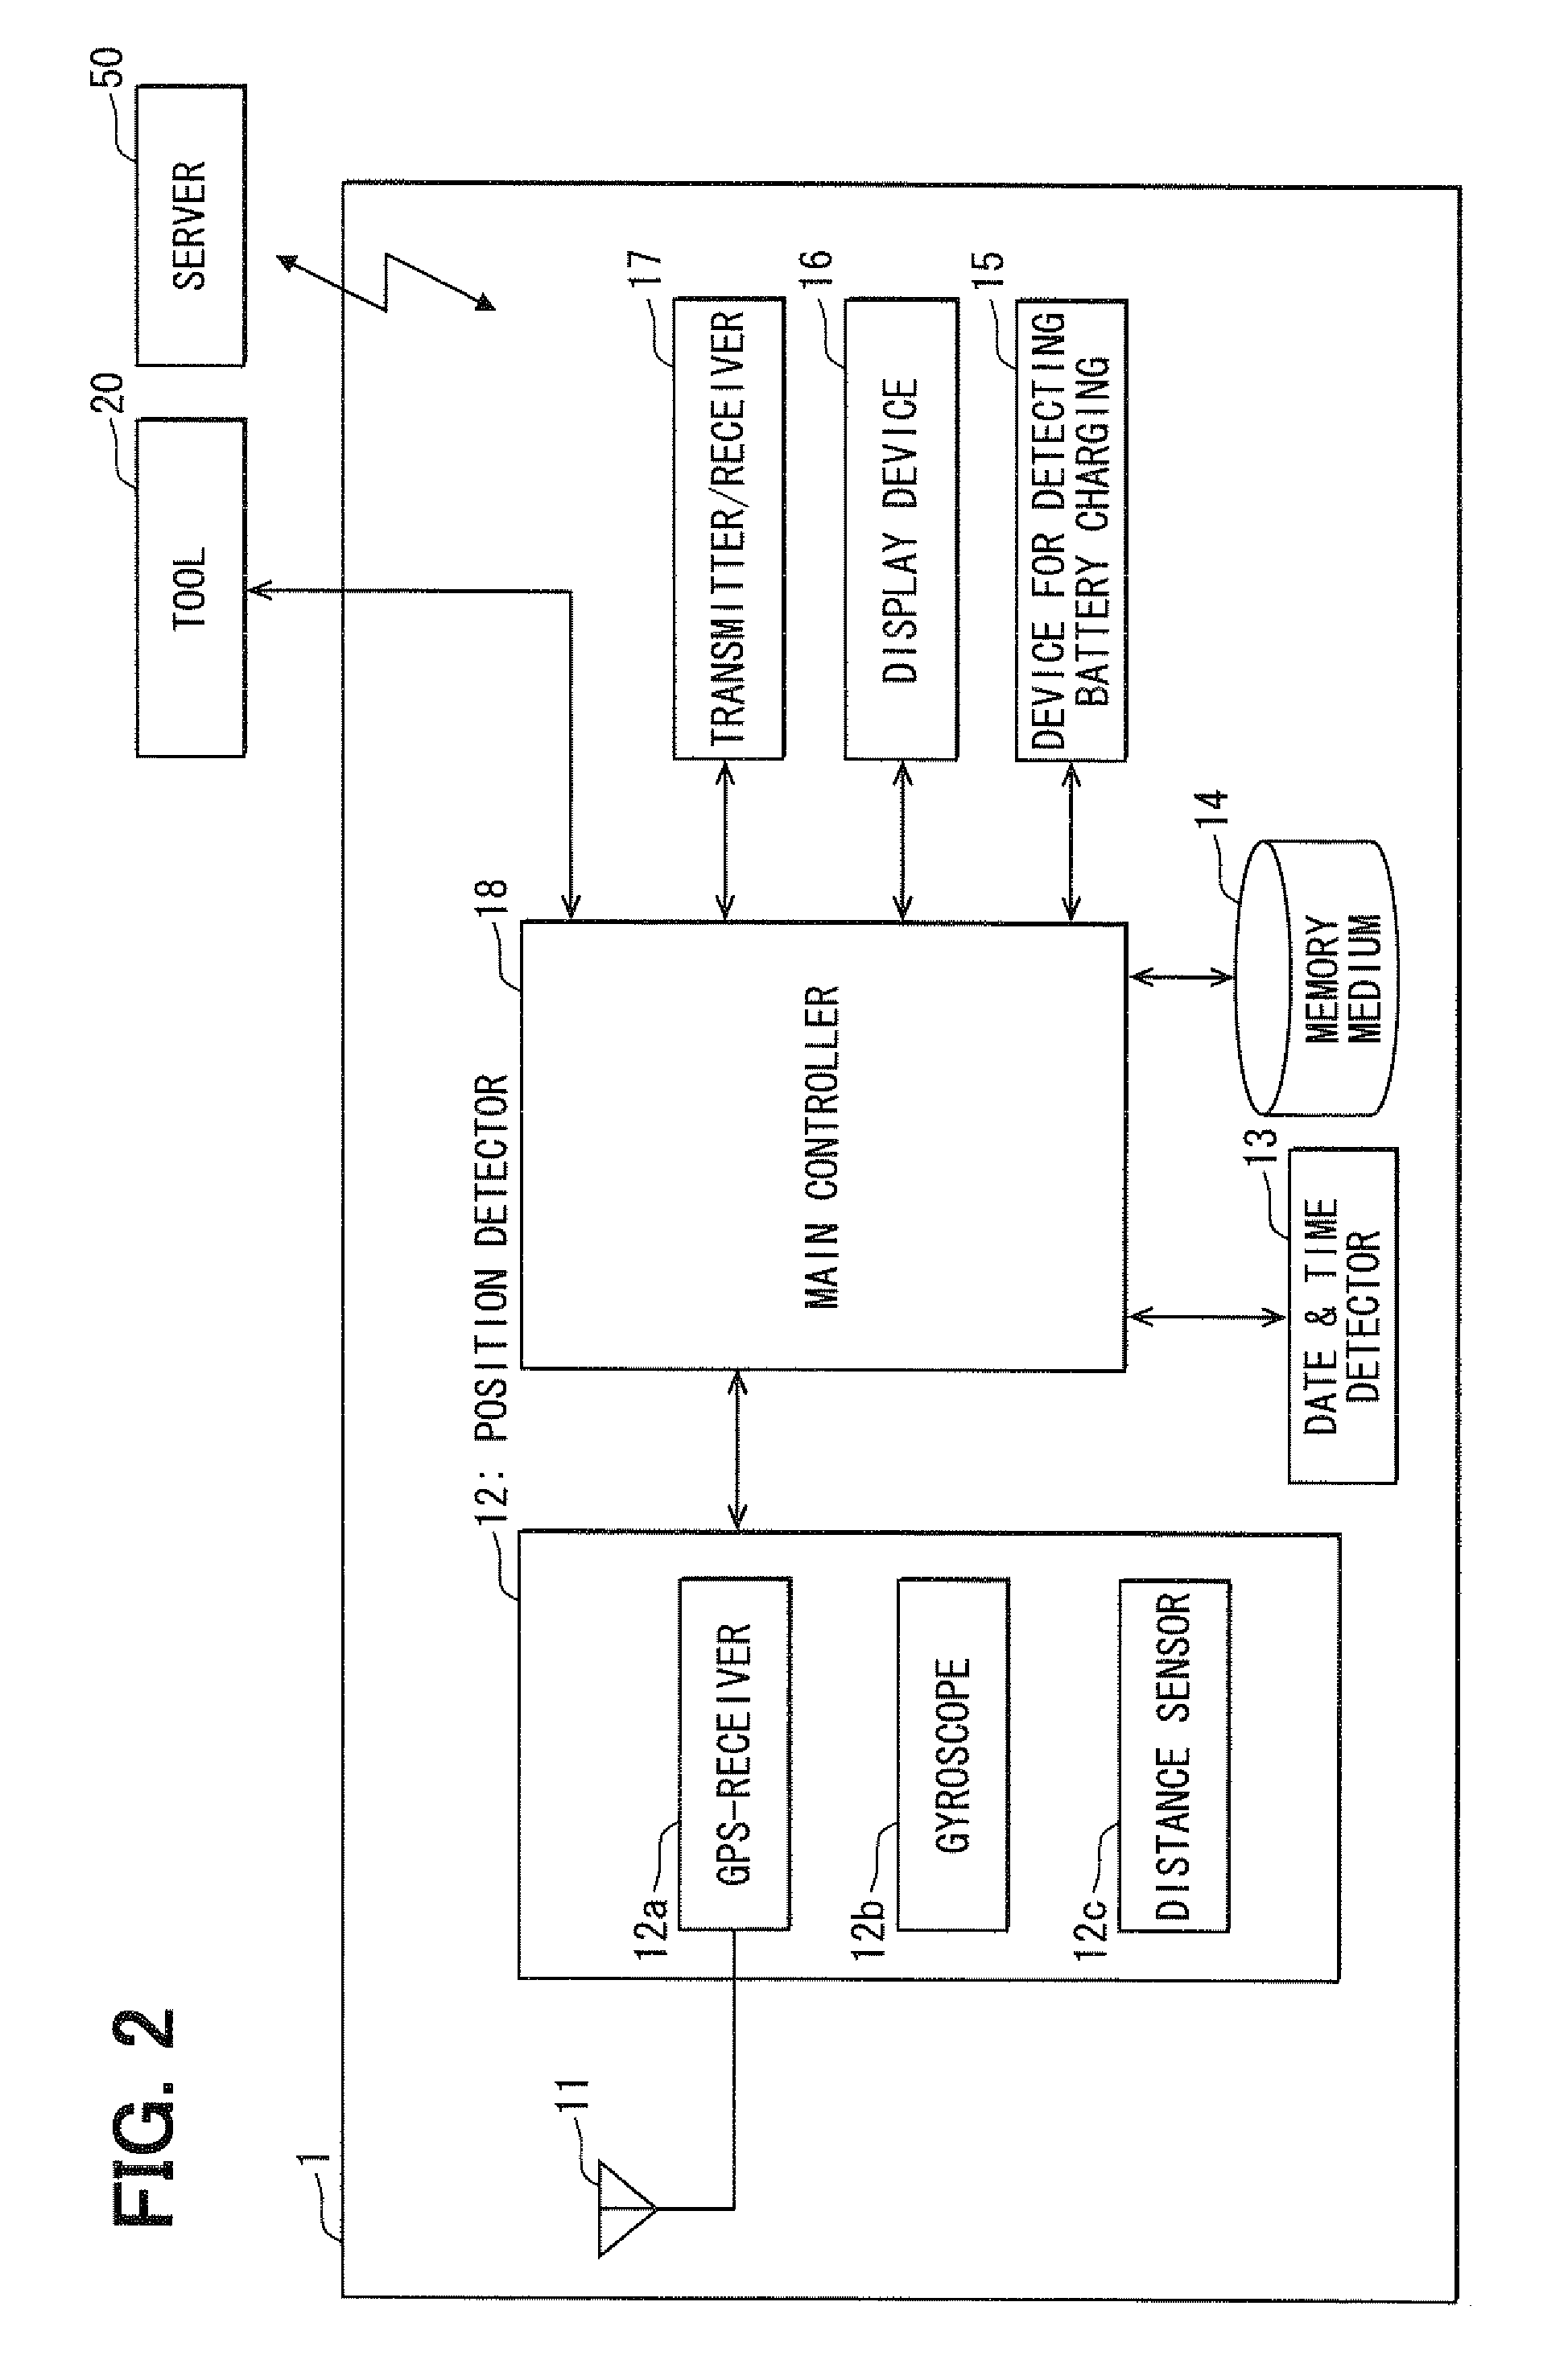 System for recording charging-history of battery mounted on automotive vehicle